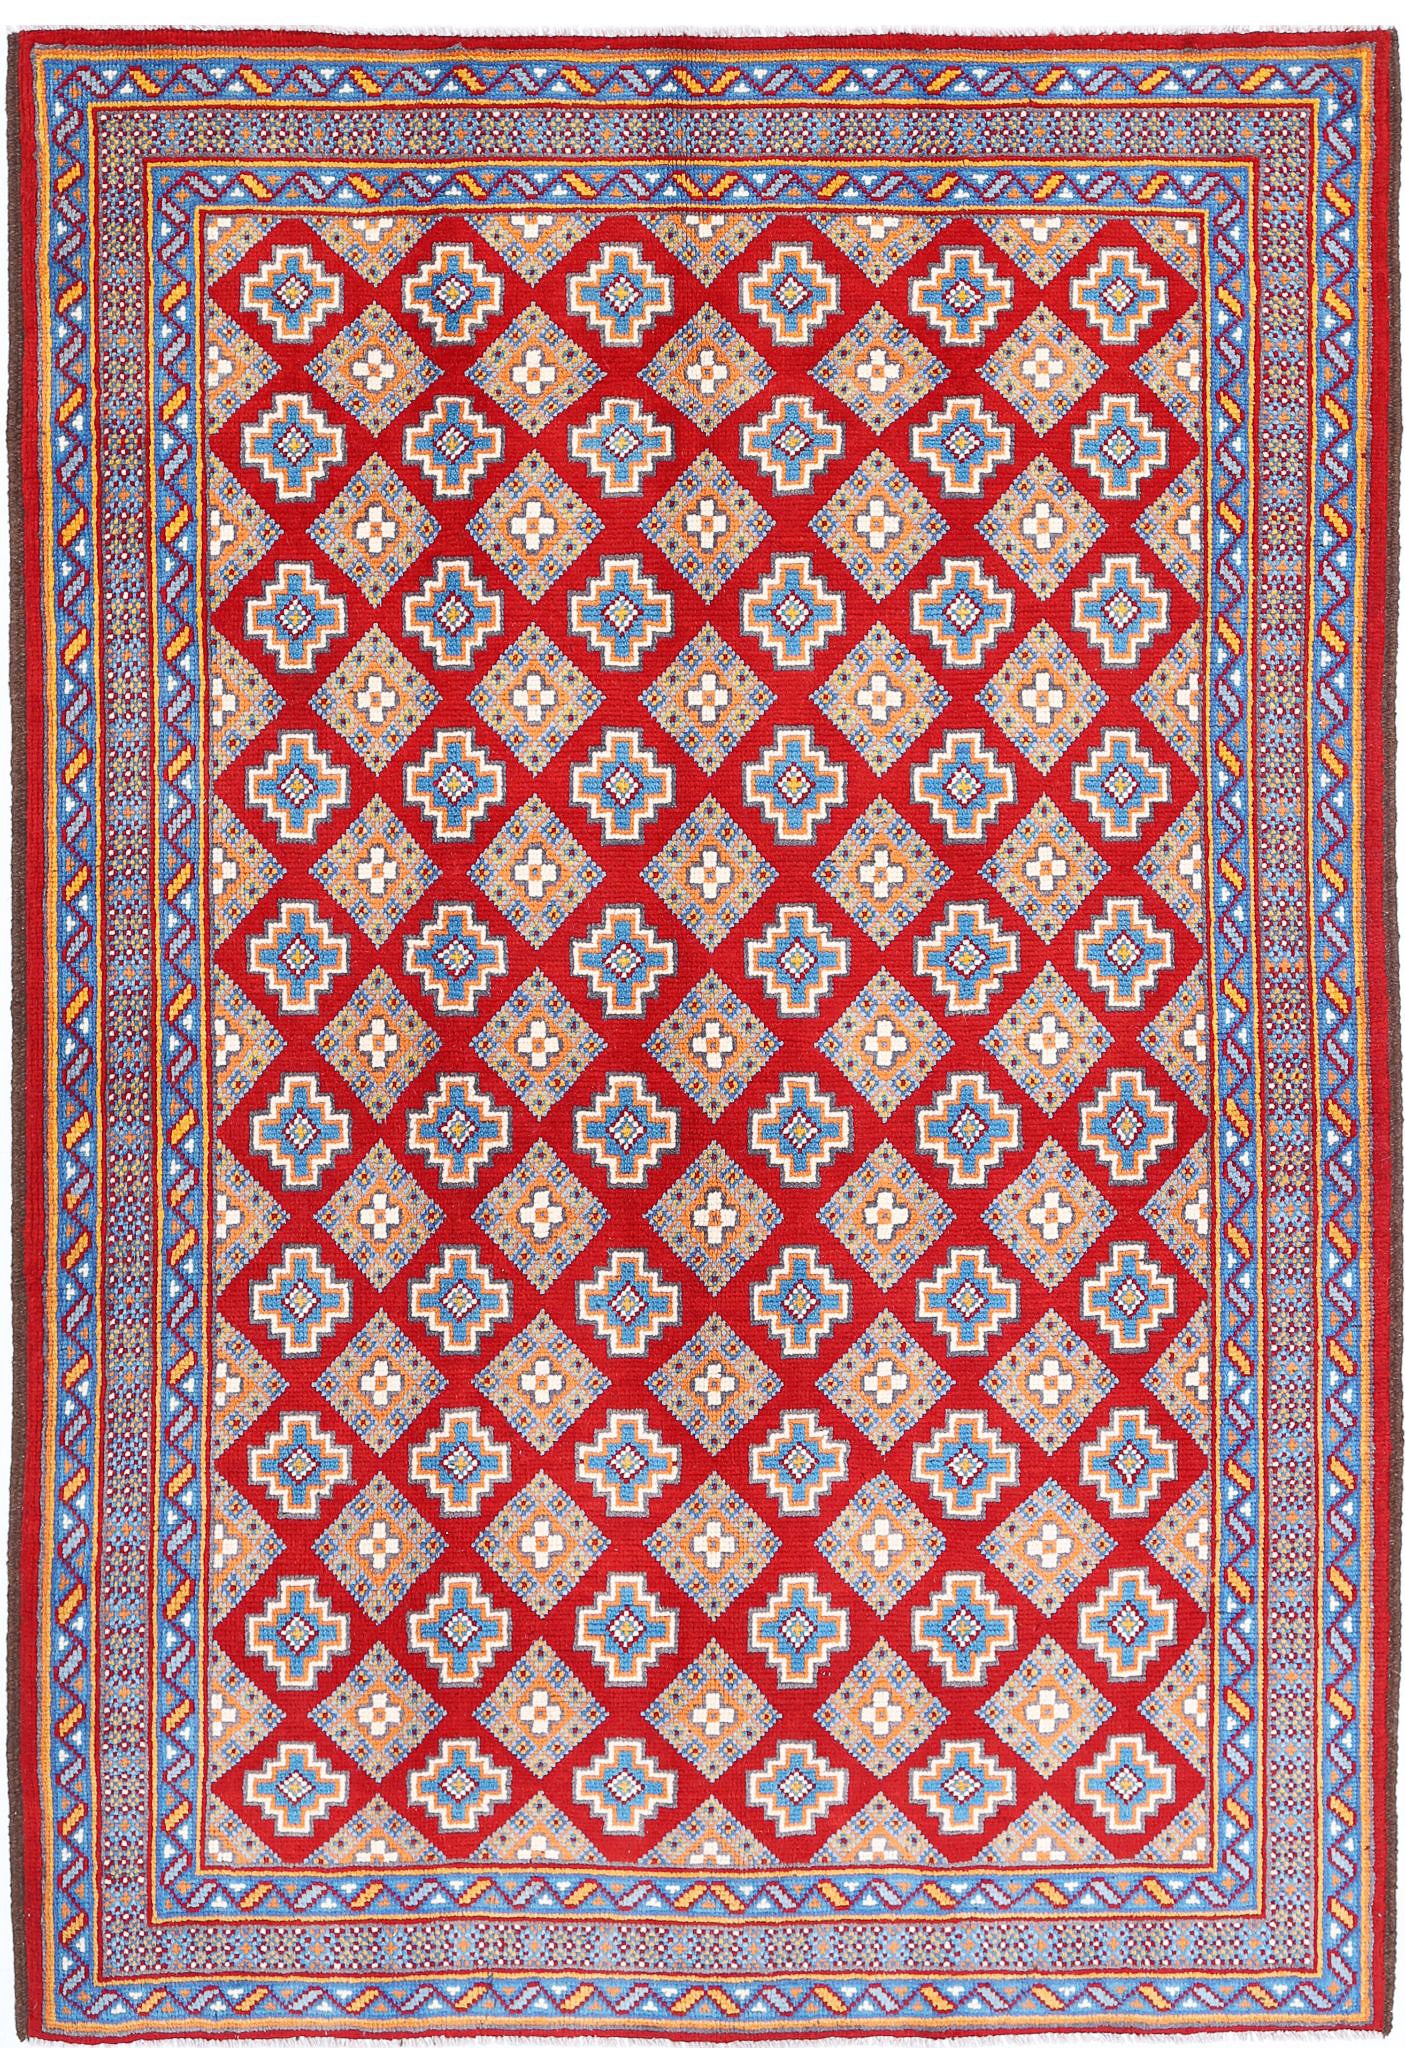 Revival-hand-knotted-qarghani-wool-rug-5014074.jpg